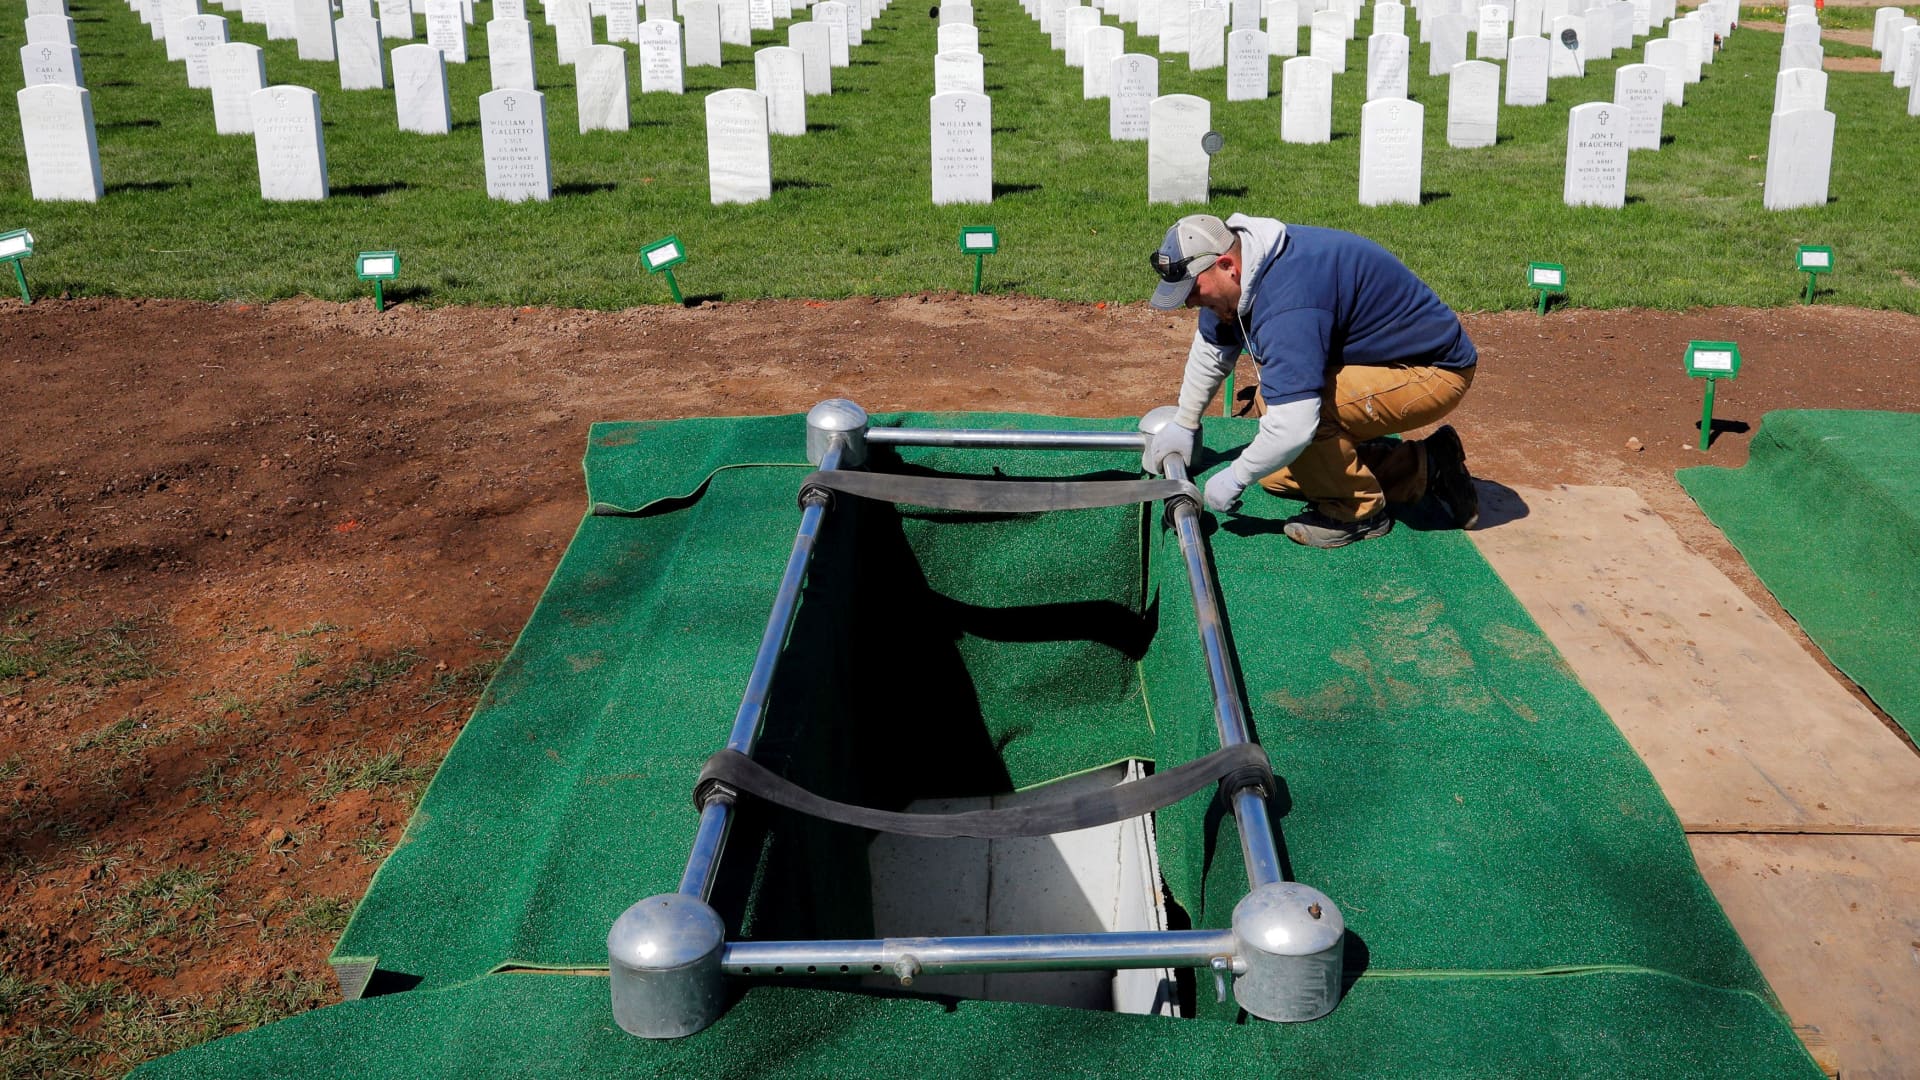 Cemetery worker Keith Yatcko prepares a grave for a burial at the State Veterans Cemetery amid the coronavirus disease (COVID-19) outbreak in Middletown, Connecticut, U.S., May 13, 2020.